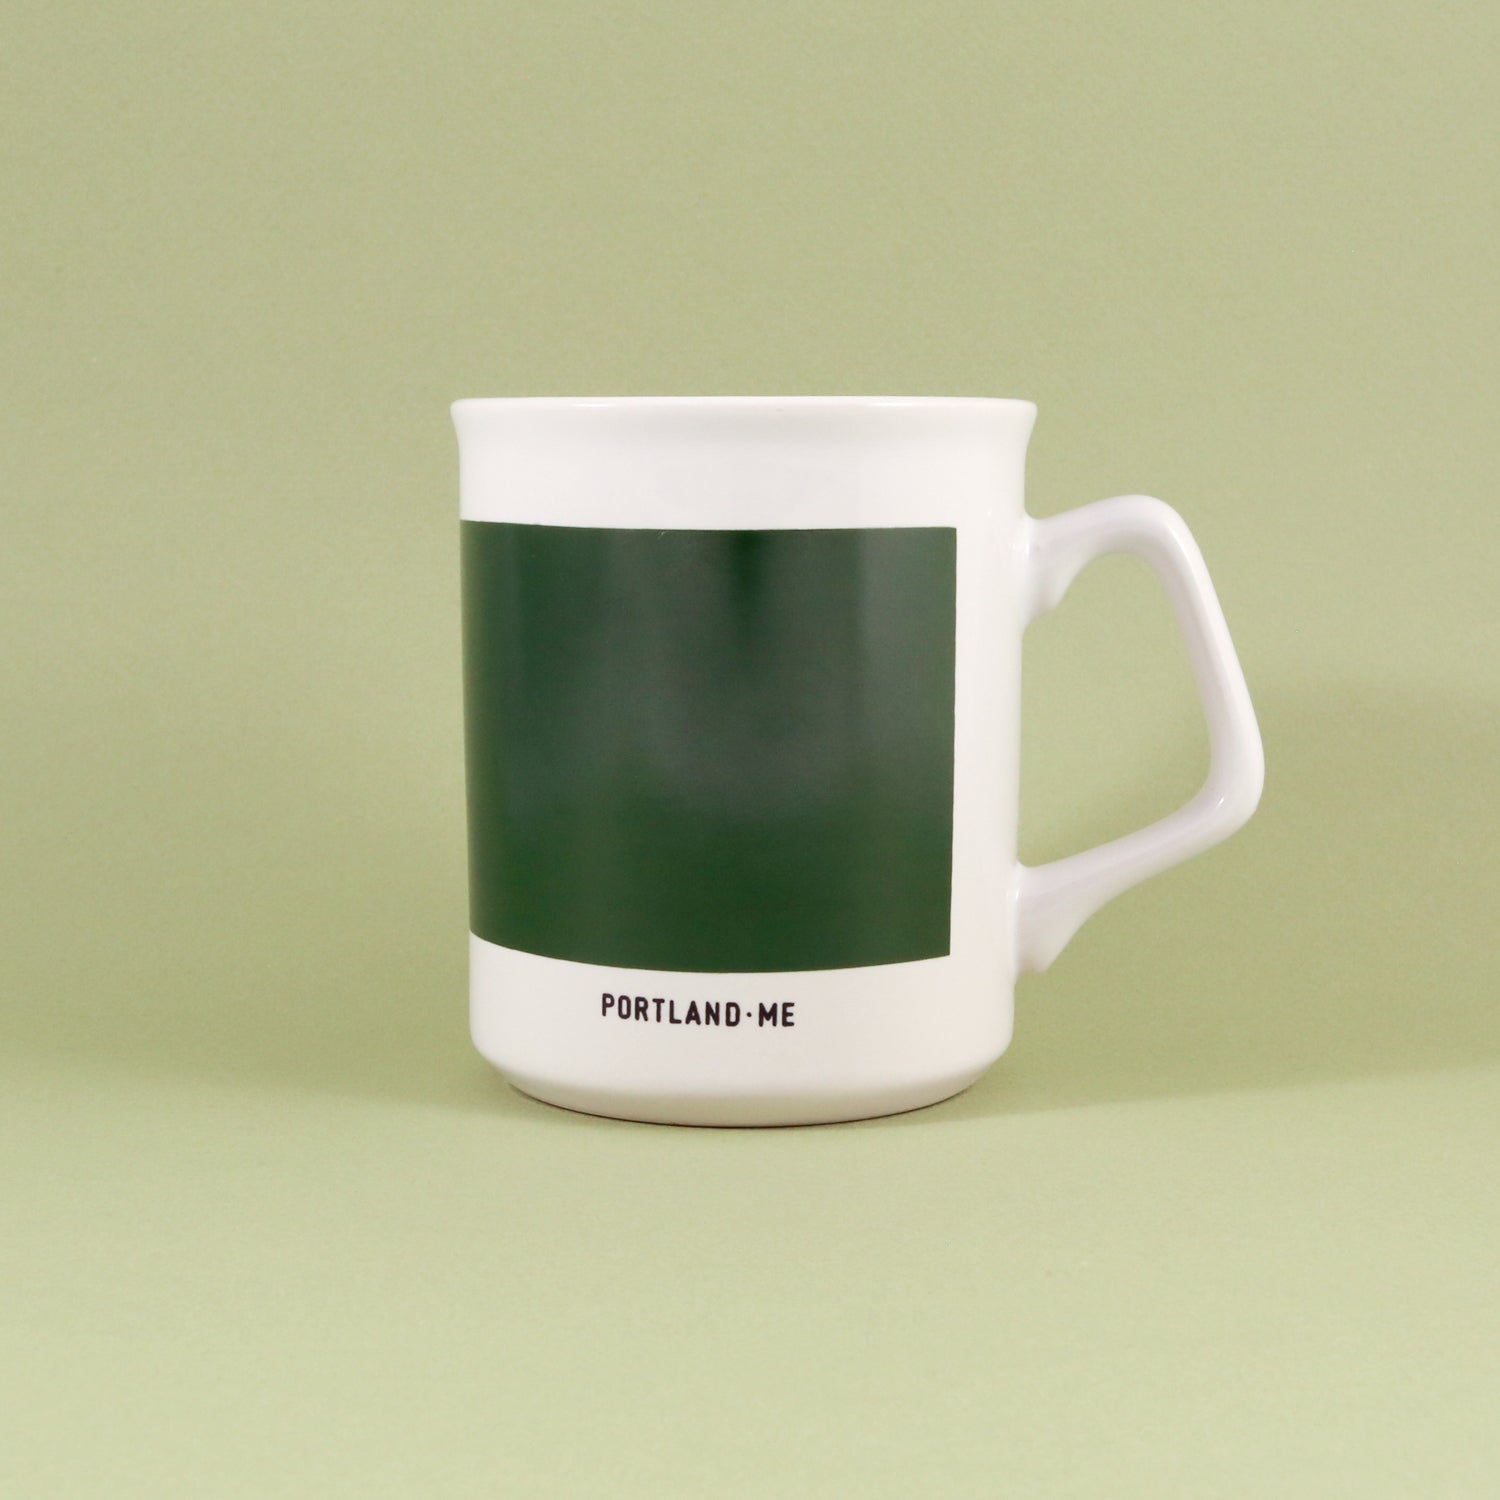 An 11oz white ceramic Maine Mug with a green band featuring the word "maine" in white, and "Tandem Coffee Roasters" written underneath, standing against a light green